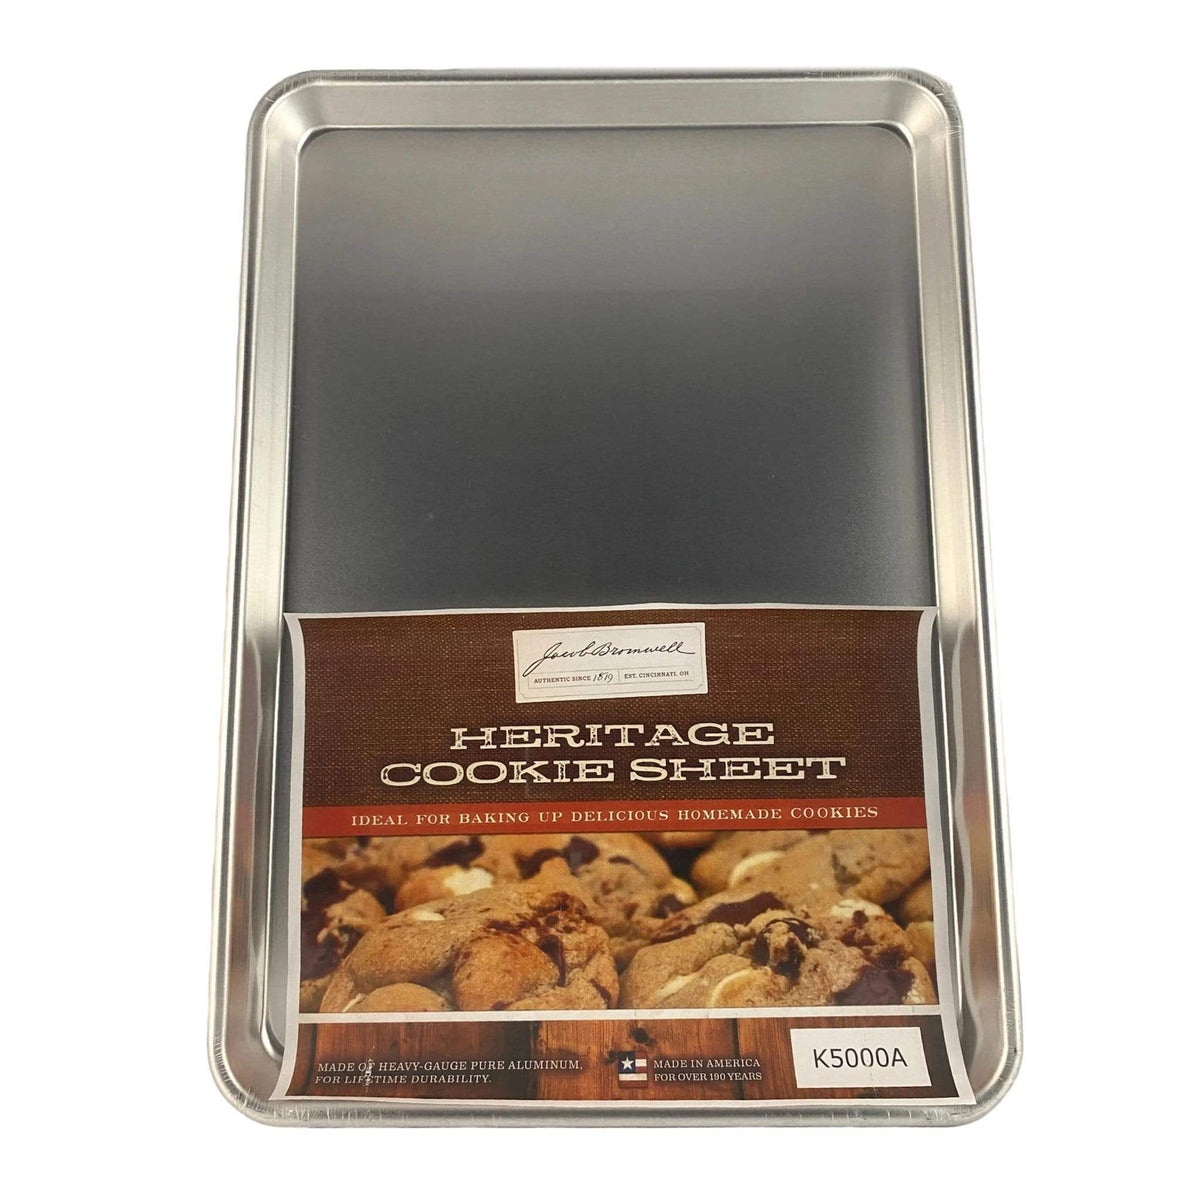 Stainless Steel Cookie Sheet Large - 14” x 17.5” - Liberty Tabletop Made in  USA